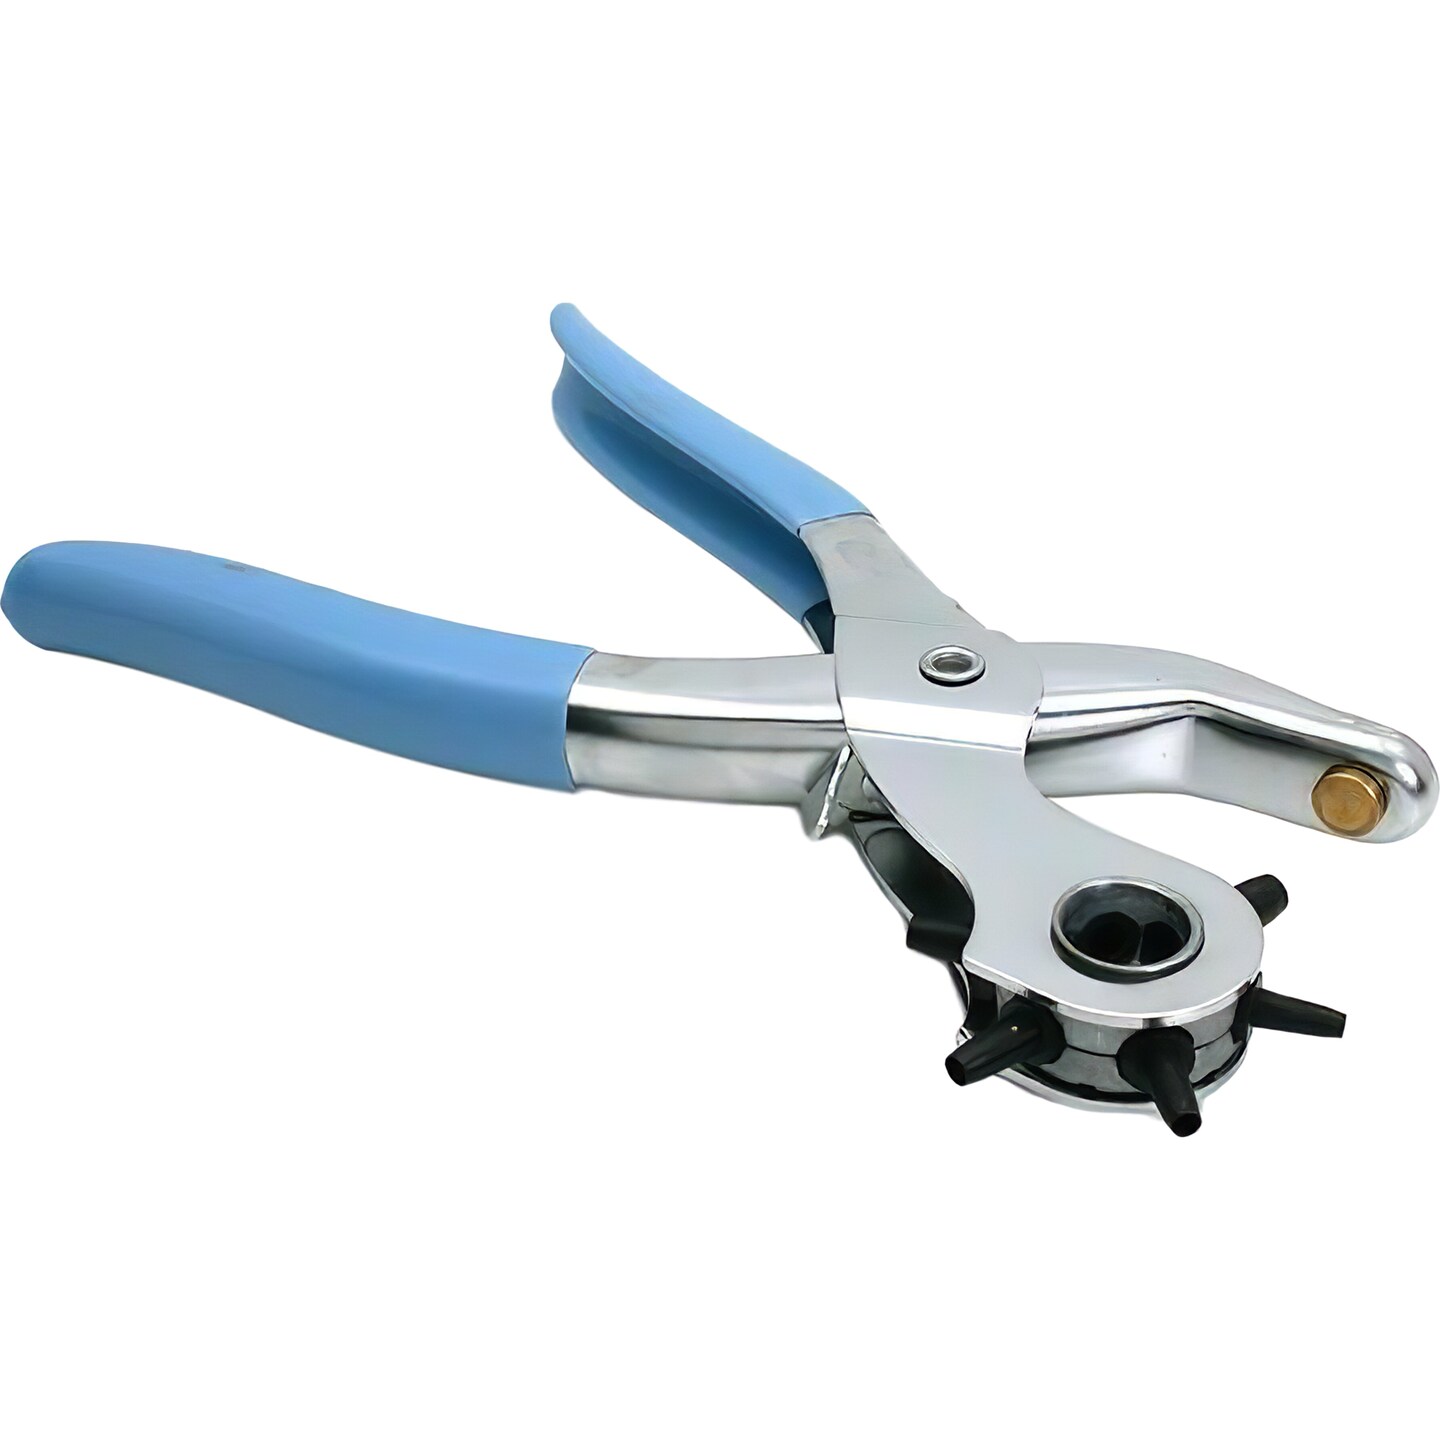 Hole Punching Machine 9 Punch Plier Round Hole Perforator Tool Make Hole  Puncher For Watchband Cards Cross Belt Price From Huangpinx, $30.67